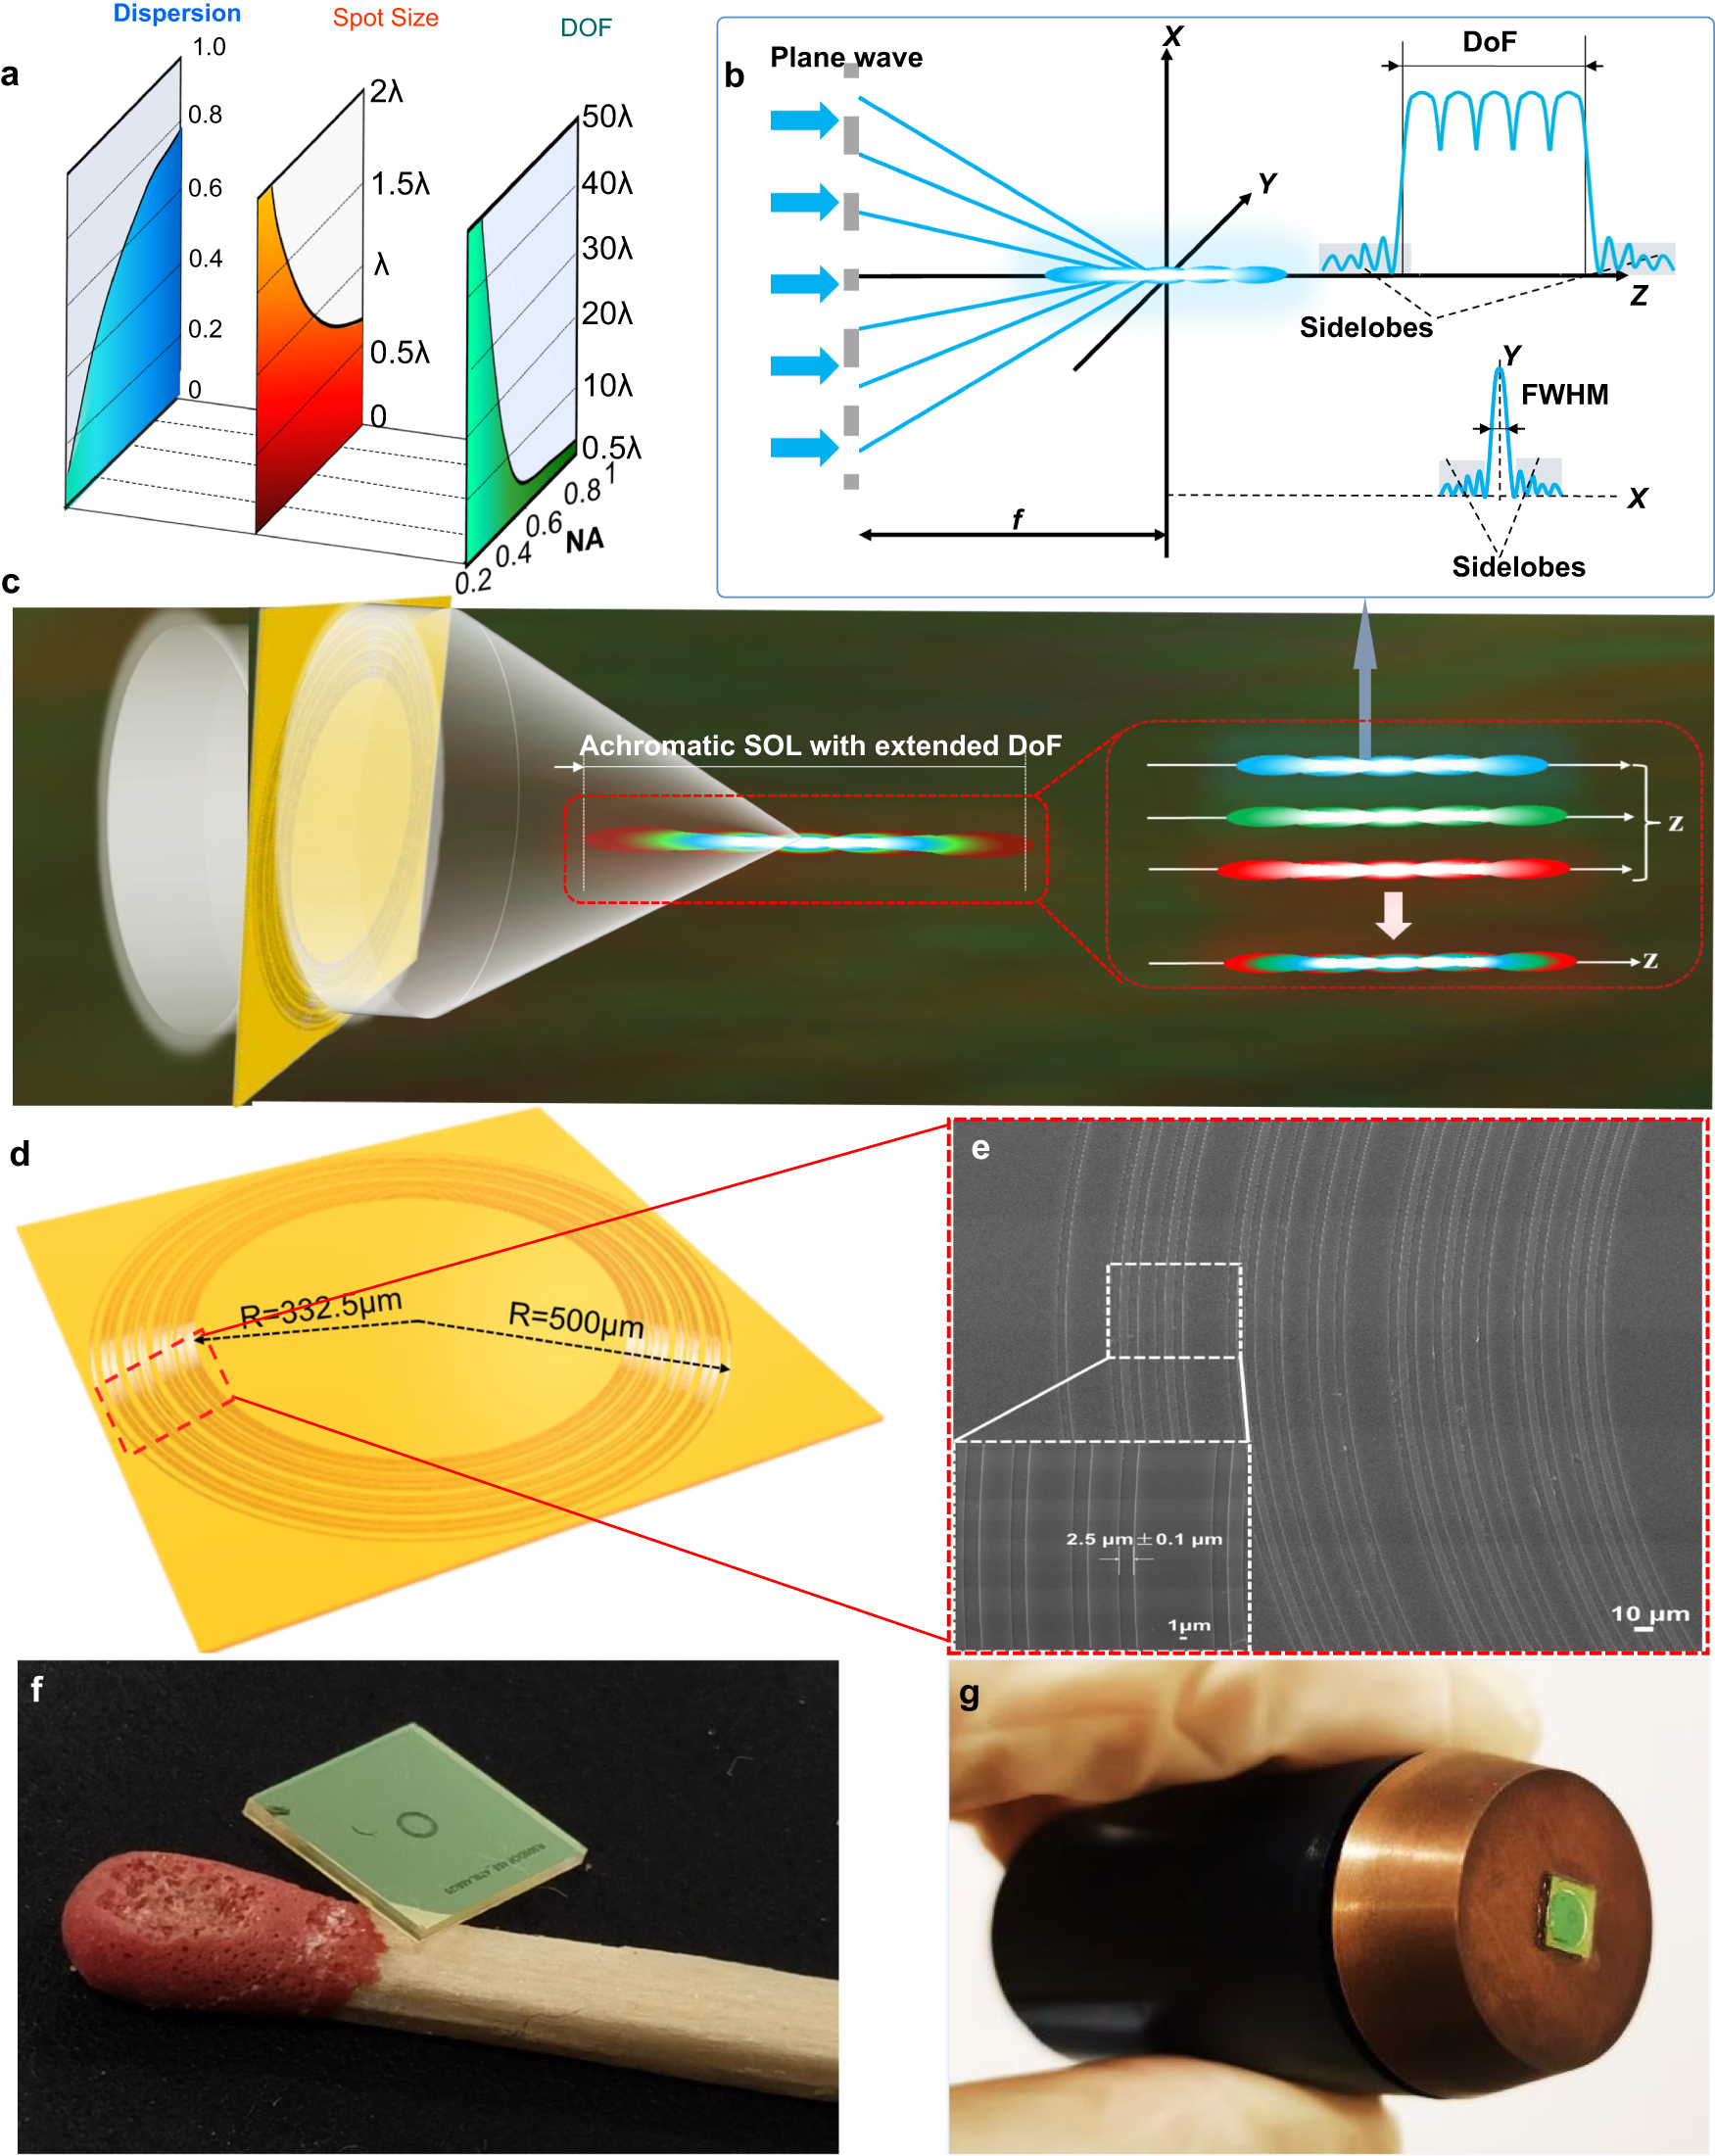 Super-resolution multicolor fluorescence microscopy enabled by an  apochromatic super-oscillatory lens with extended depth-of-focus